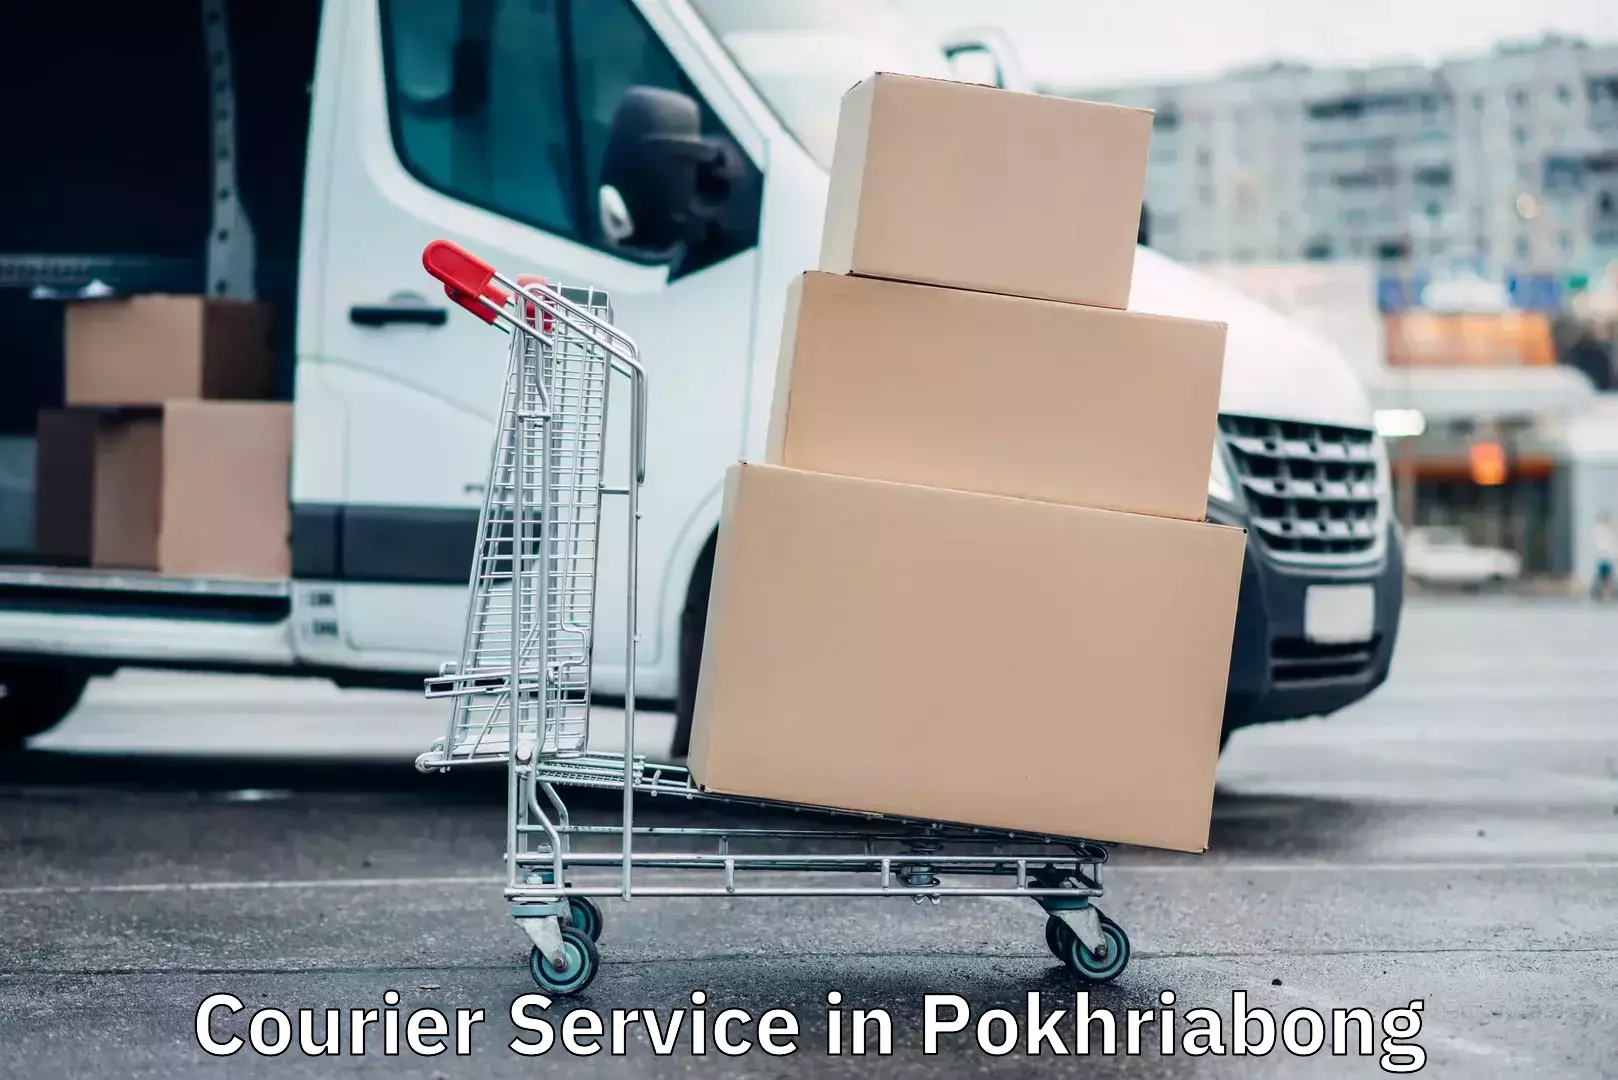 Efficient freight service in Pokhriabong